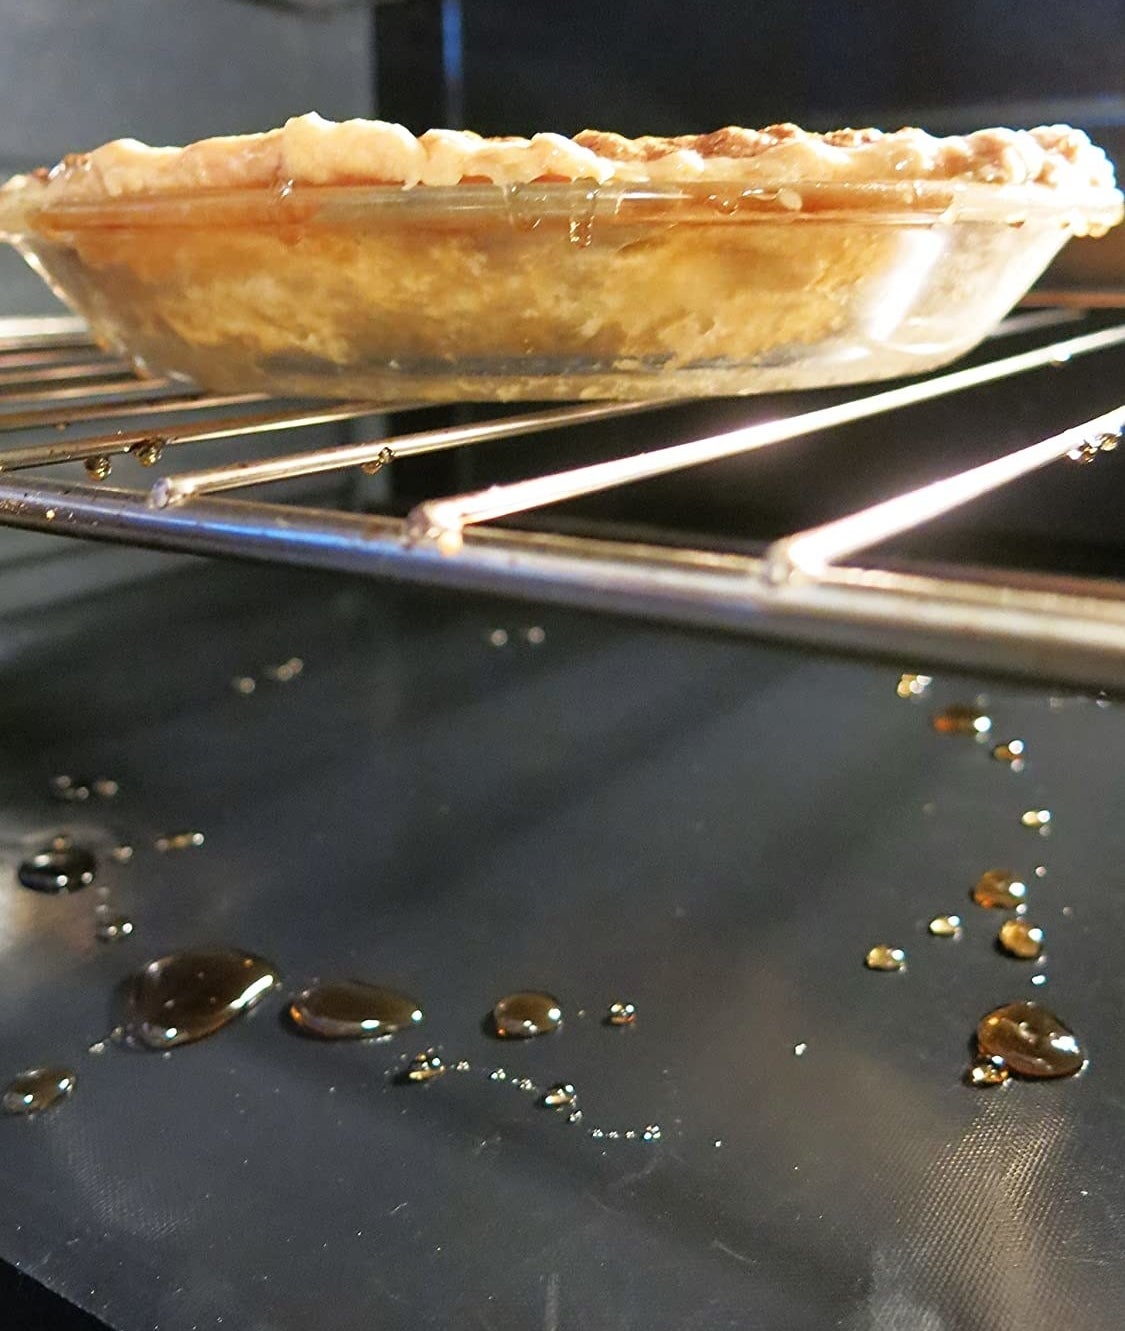 oven liner in bottom of oven catching drippings from a baking pie 